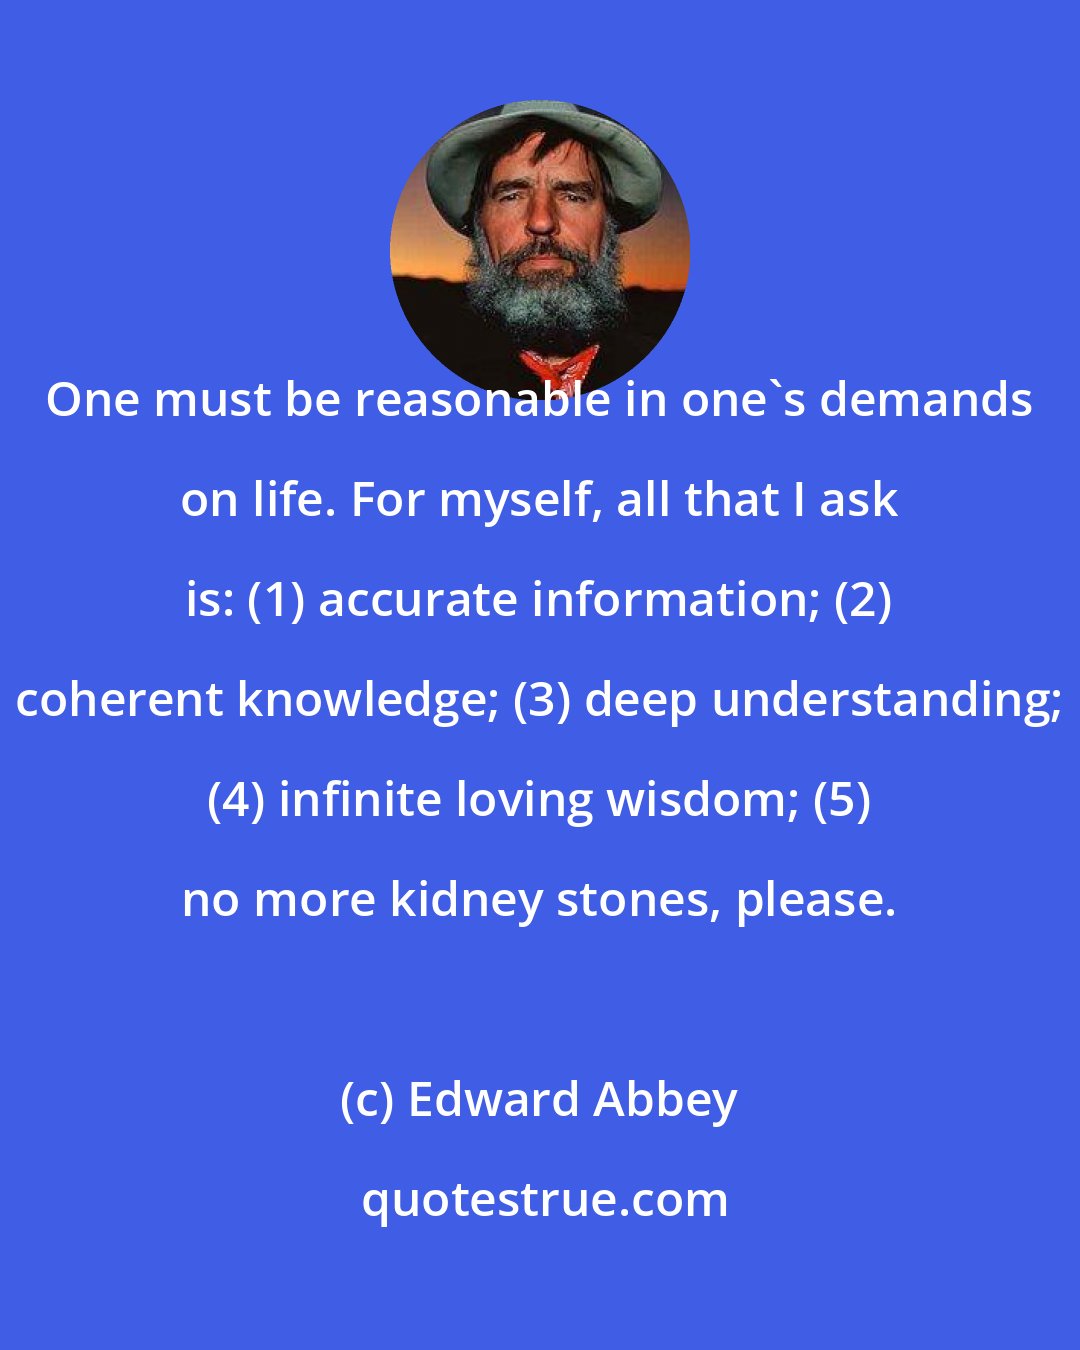 Edward Abbey: One must be reasonable in one's demands on life. For myself, all that I ask is: (1) accurate information; (2) coherent knowledge; (3) deep understanding; (4) infinite loving wisdom; (5) no more kidney stones, please.